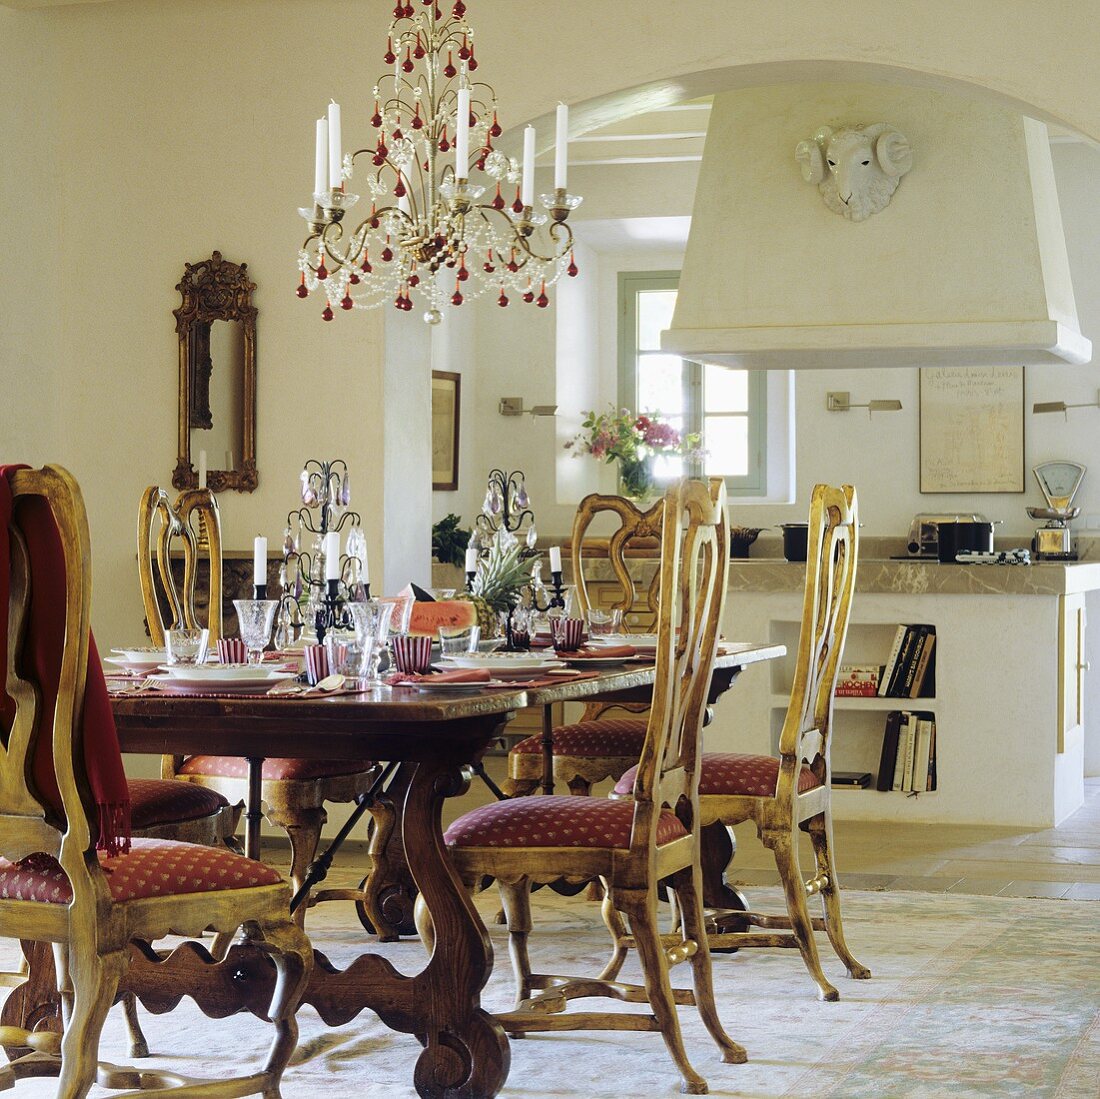 A laid table set with upholstered country house chairs and a chandelier with an open Mediterranean-style kitchen in the background